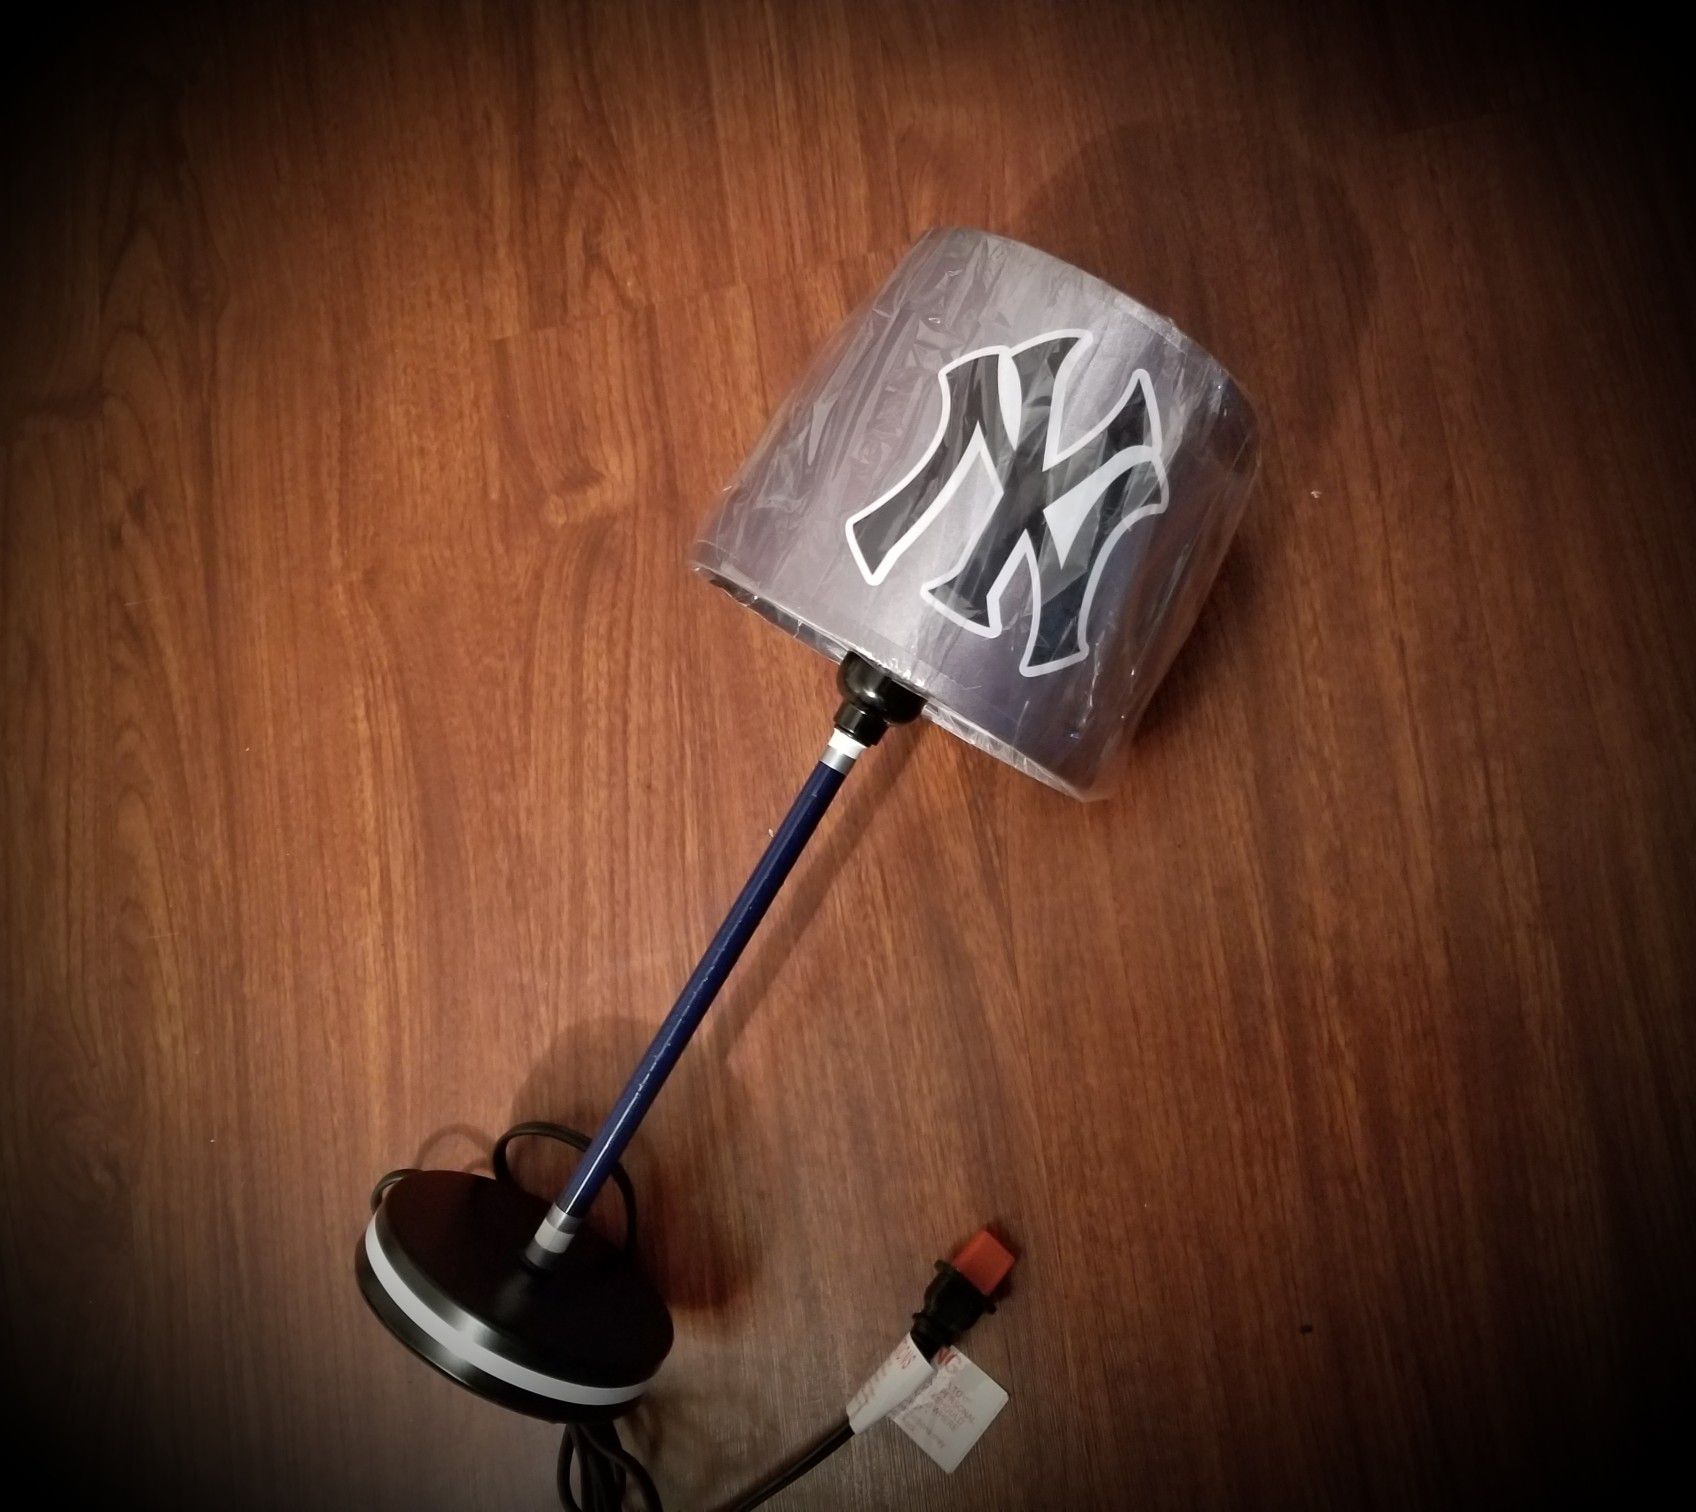 Ny yankees"fanatic"team lamp 4 ur home/office*business*mancave*gifts/anniversaries & more*brand new